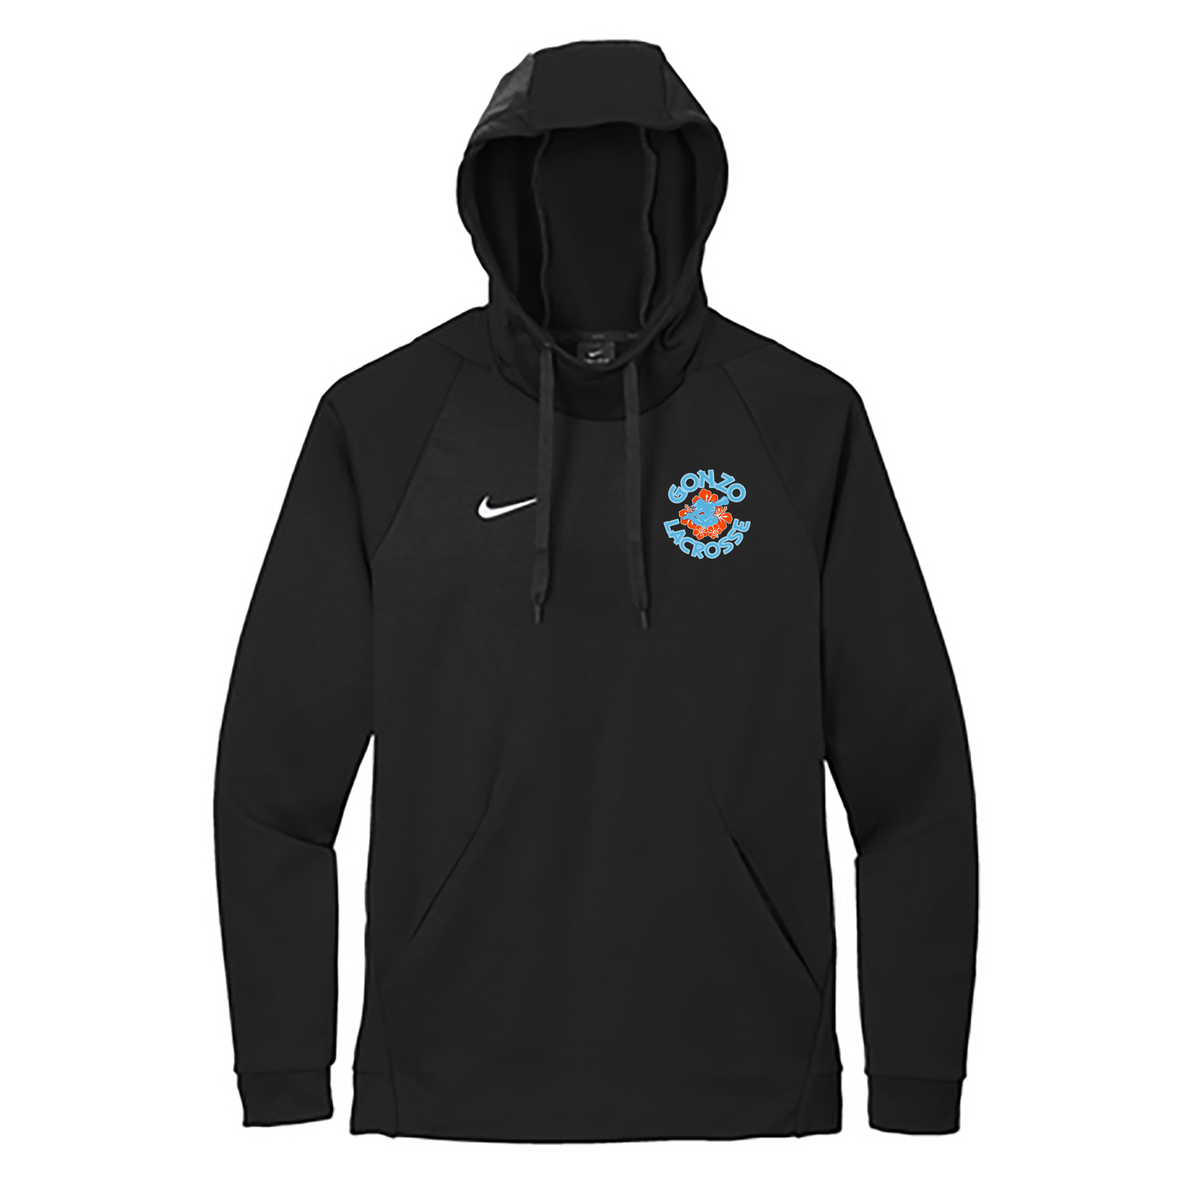 Gonzo Girls Lacrosse Nike Therma-FIT Embroidered Hoodie